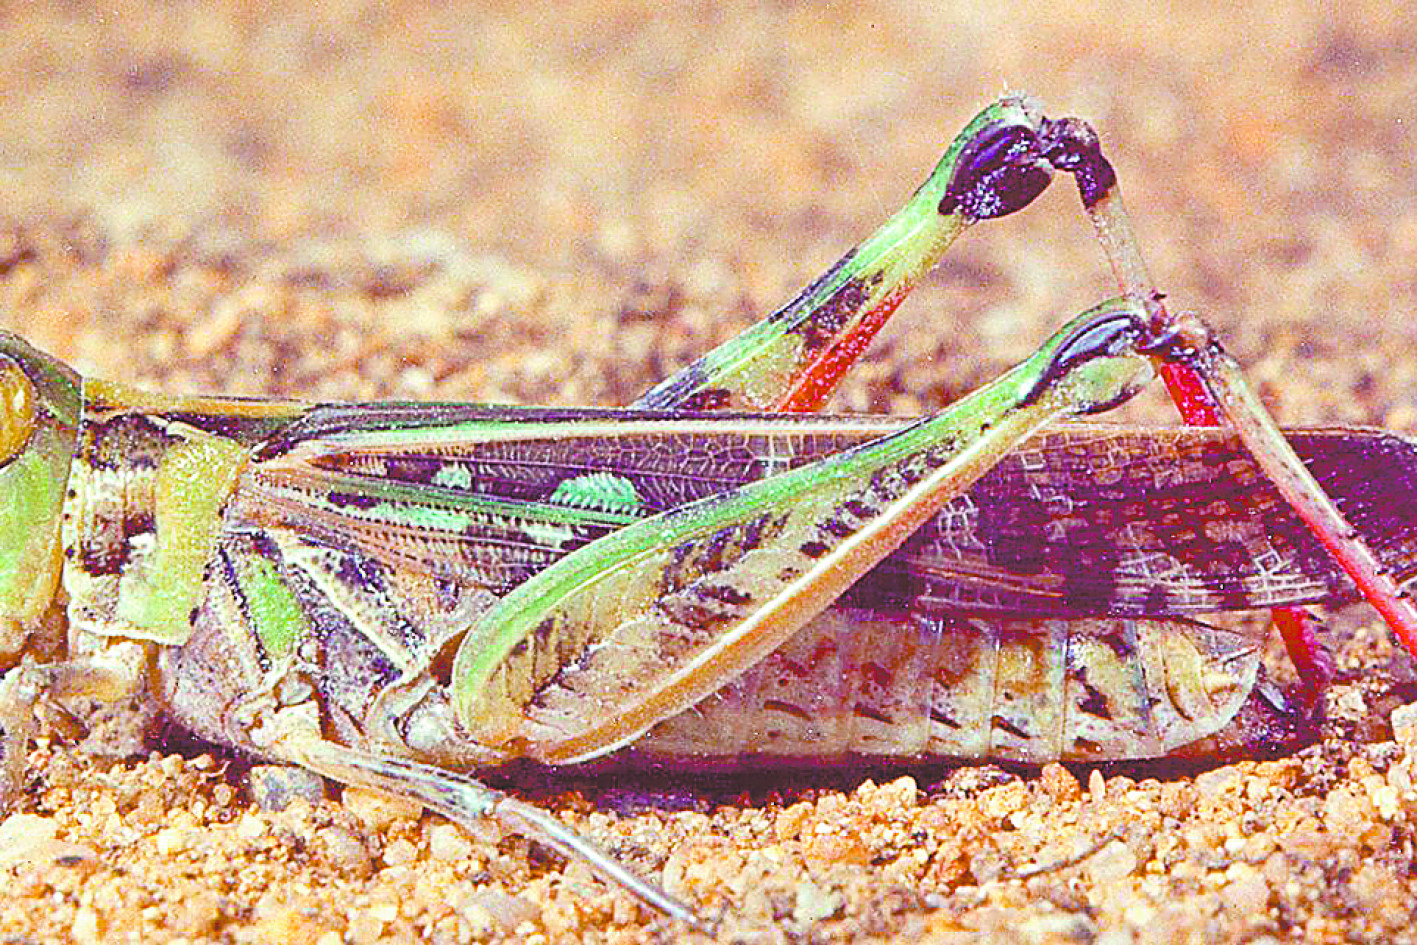 Watch-out, locusts are about! There have been a number of recent reports of increasing numbers of Australian plague locusts in the district, with the Local Lands Service reminding landholders to remain vigilant and report any activities of the serial pest immediately. Photo: LLS